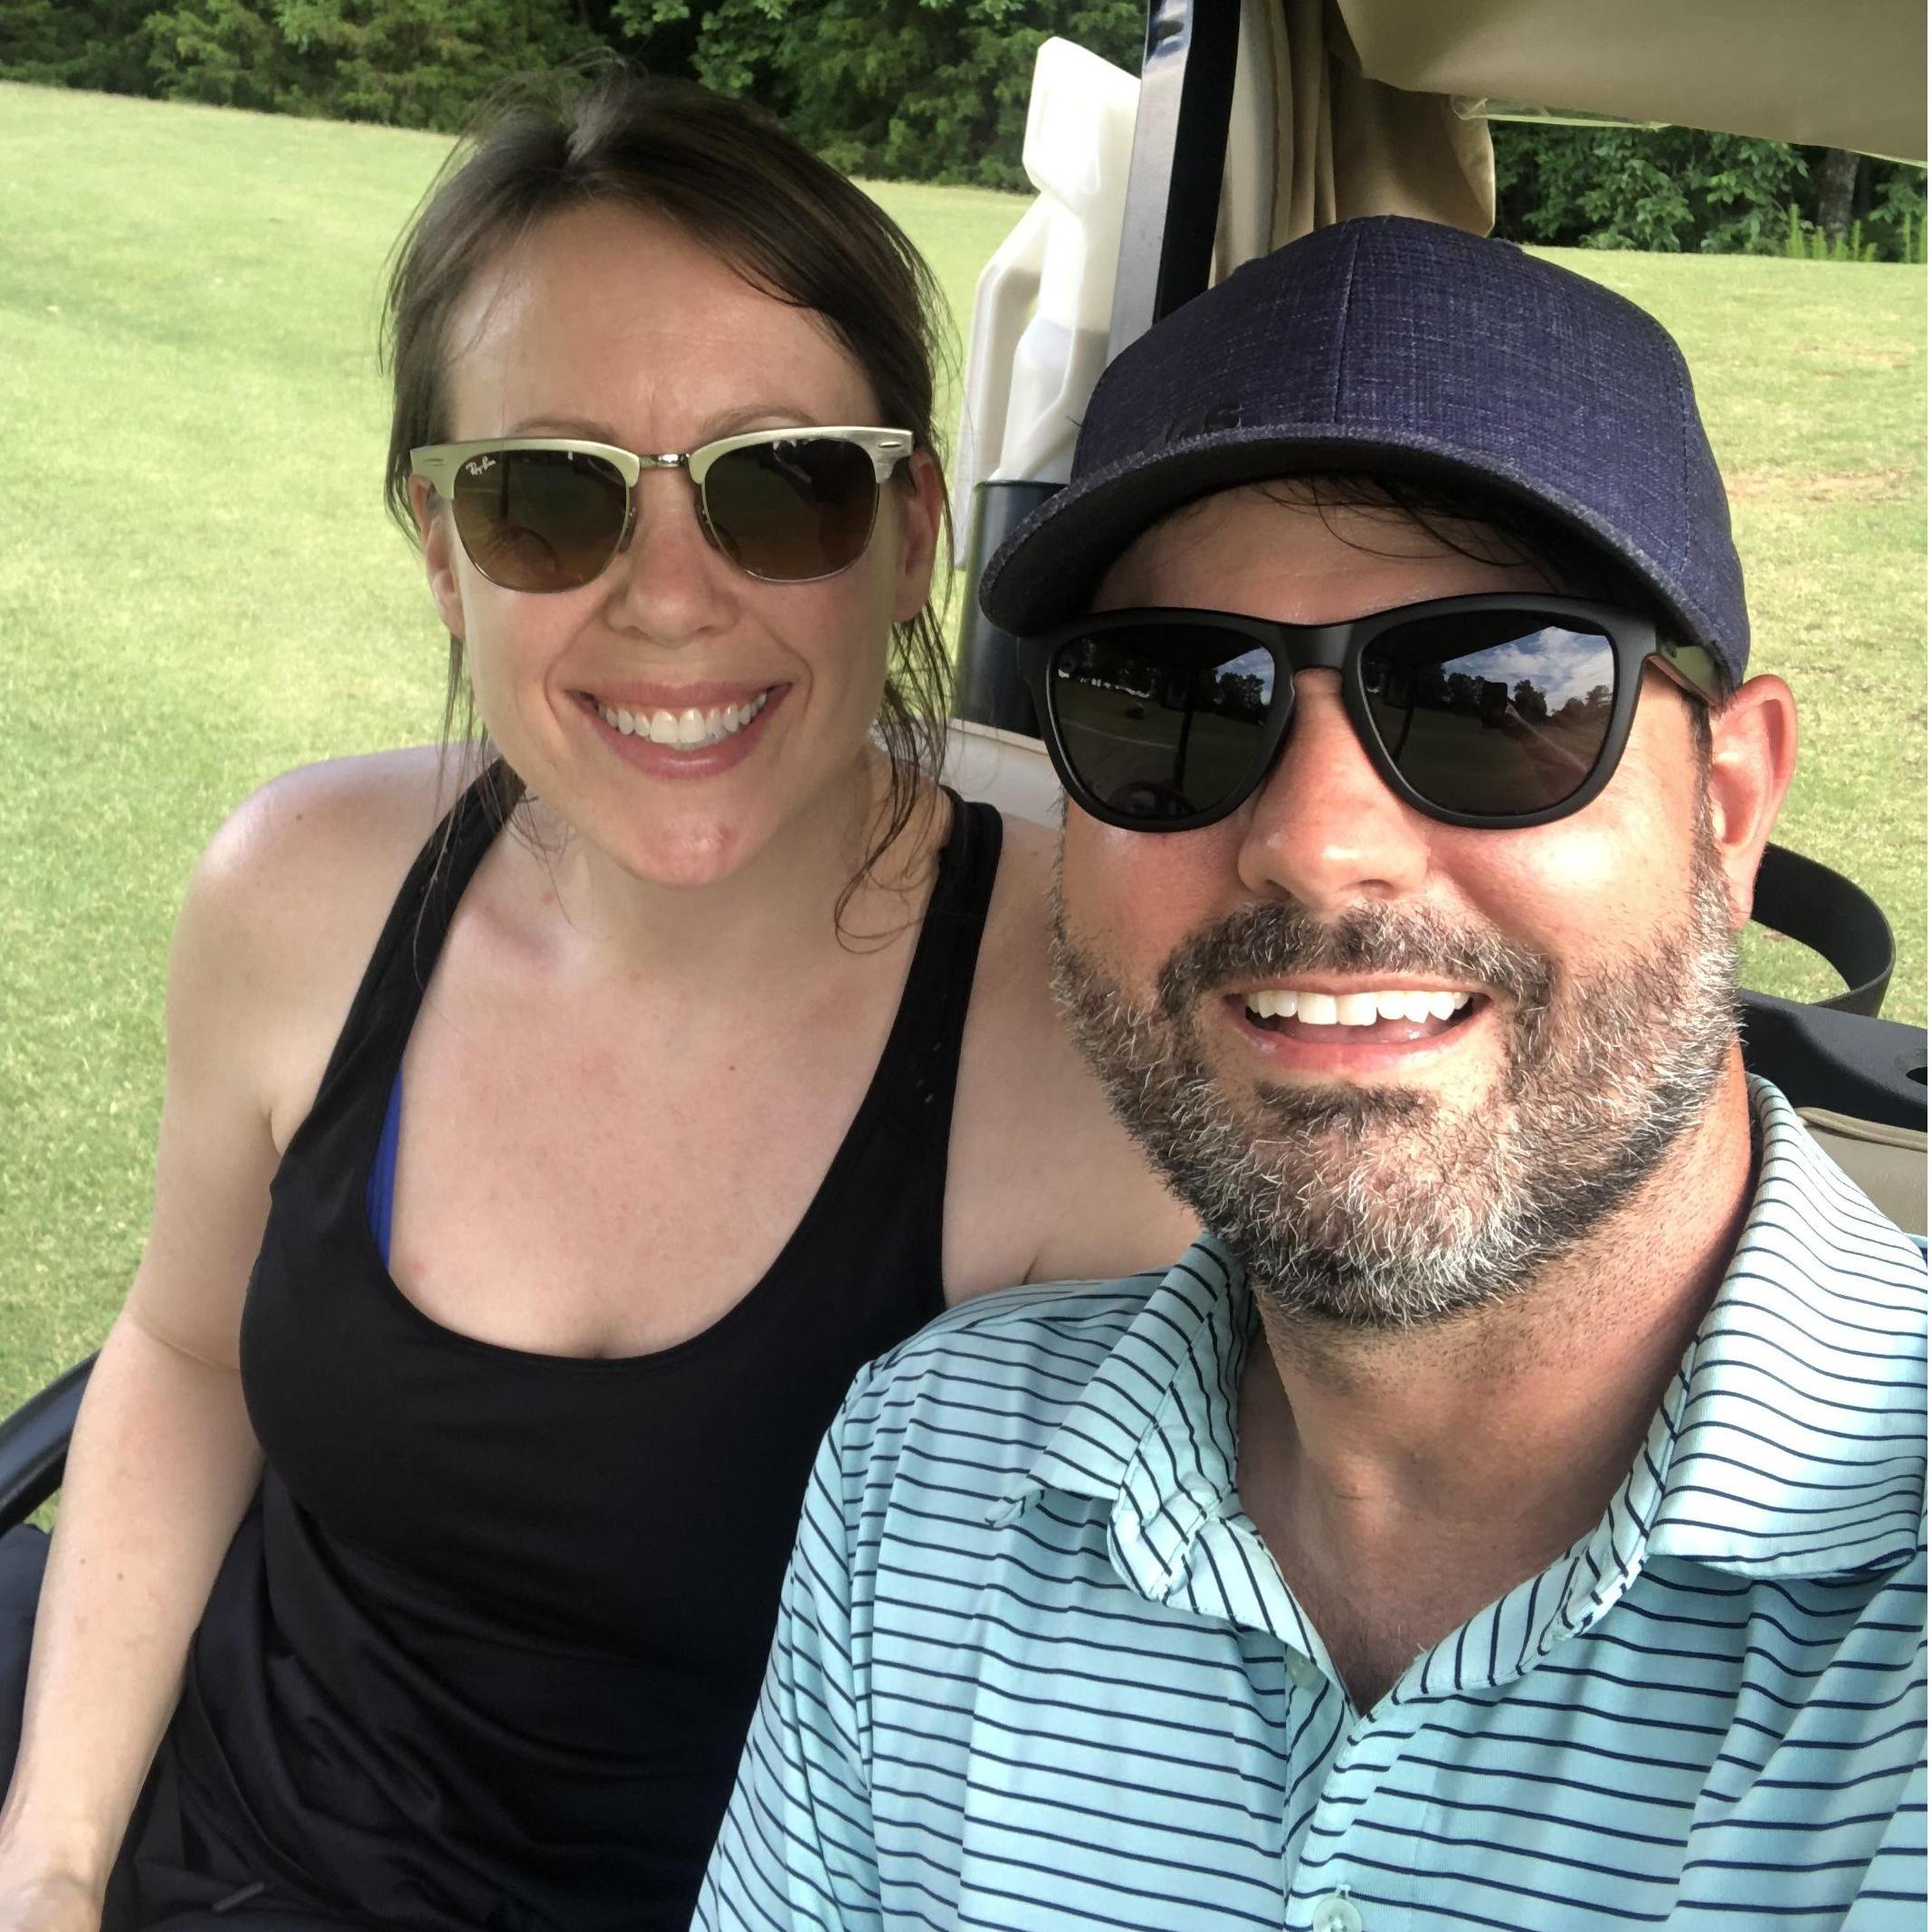 That one time he let me go golfing with him. It’s not all it’s cracked up to be. I’m still not sure why he enjoys it so much, but I’m happy if he’s happy.